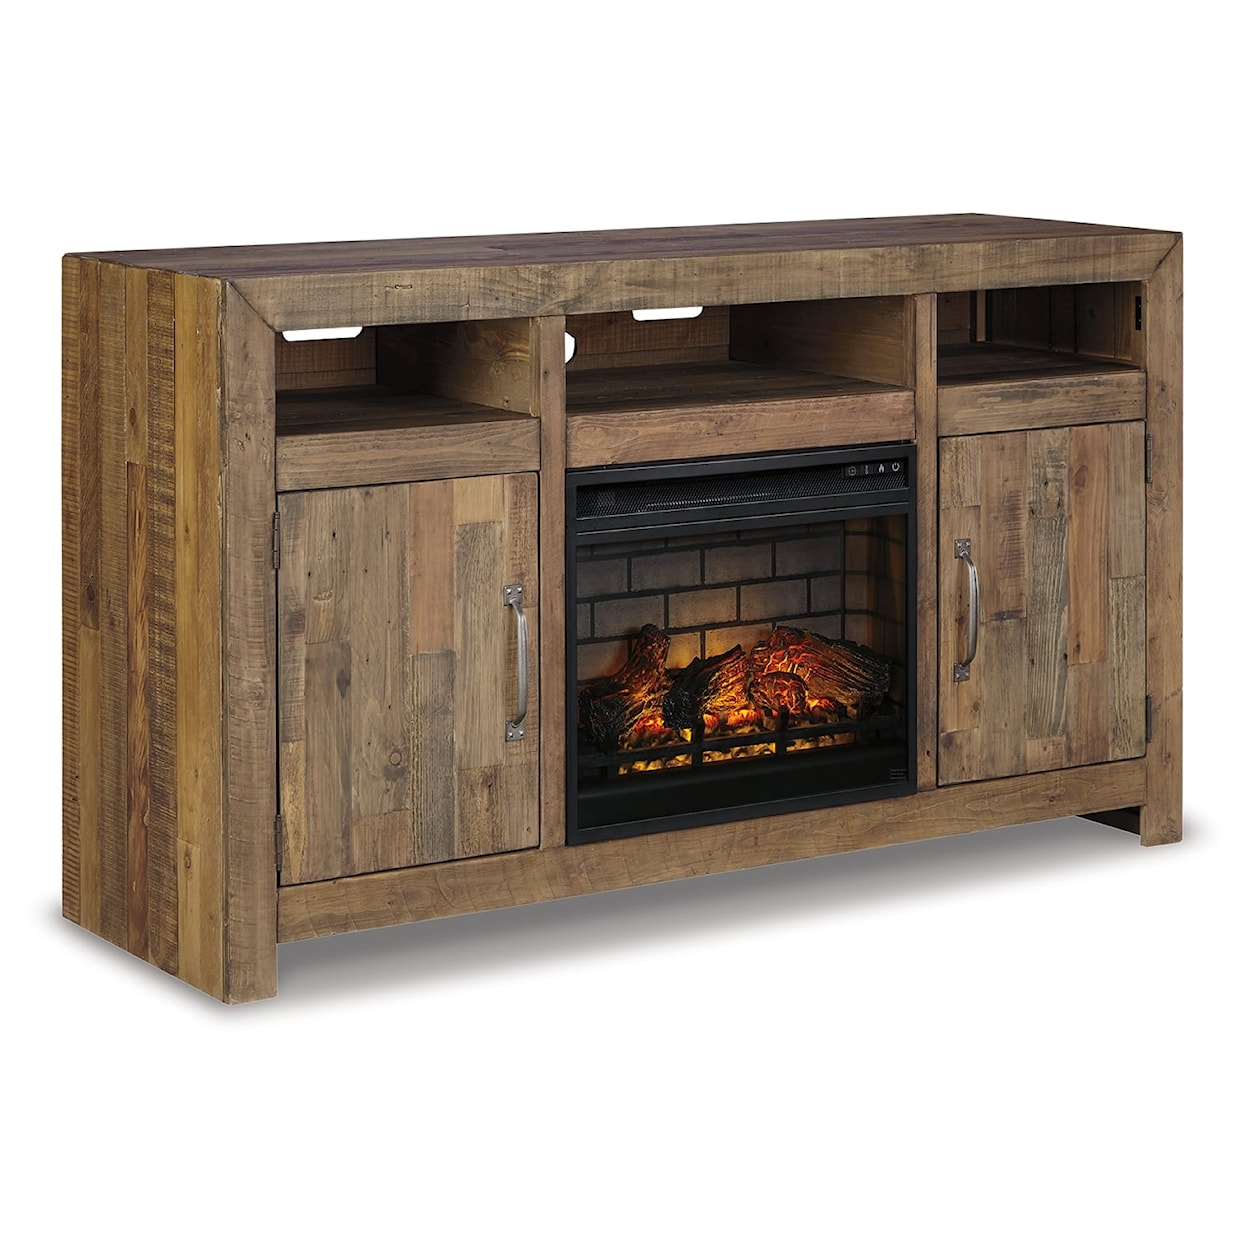 Benchcraft Sommerford 62" TV Stand with Electric Fireplace